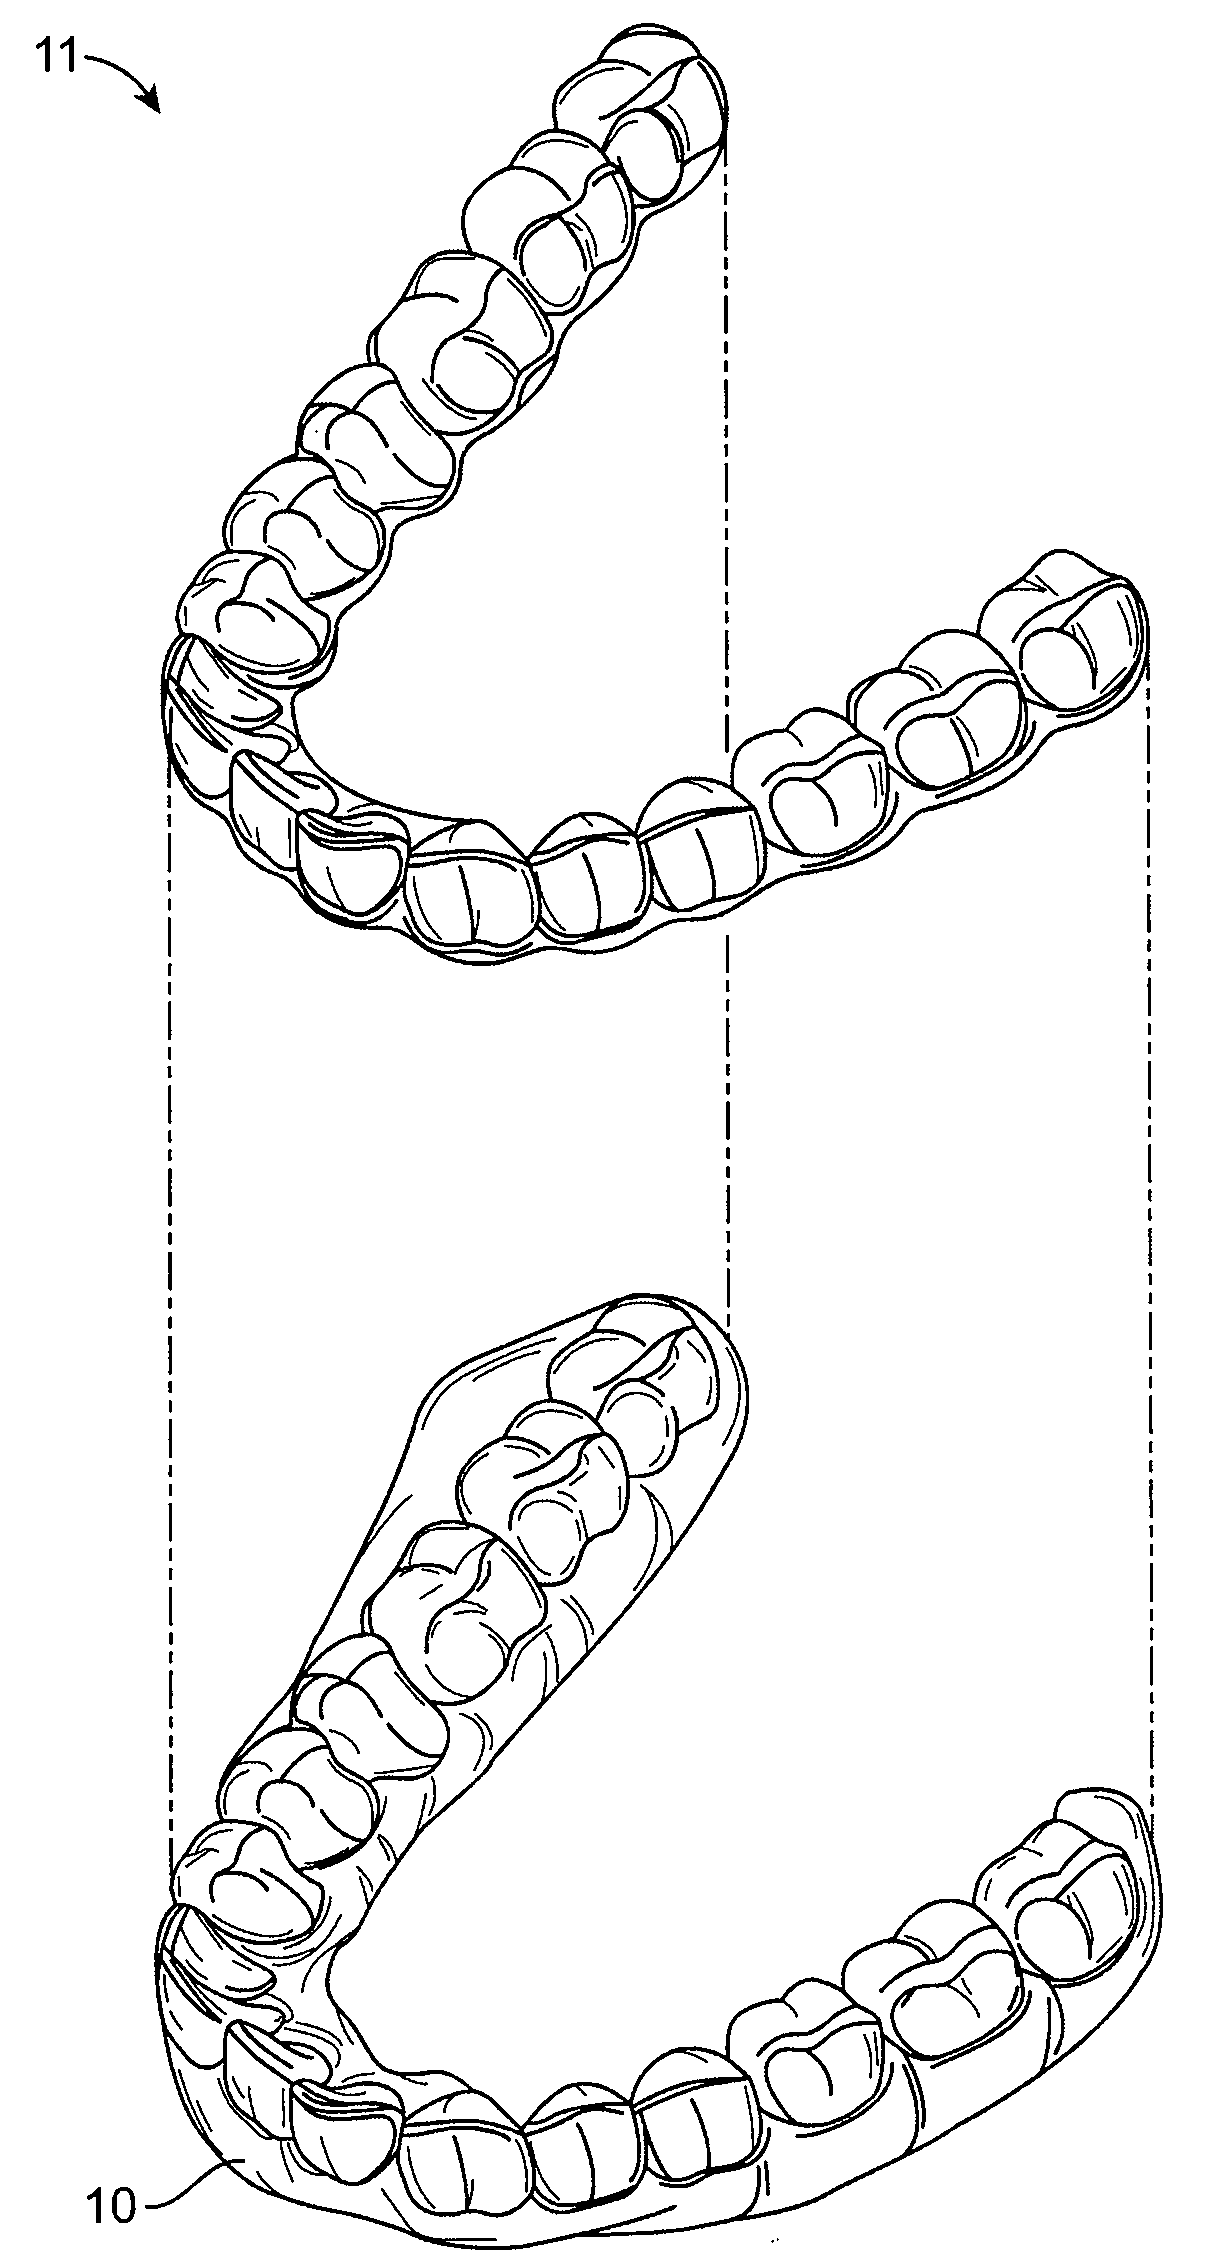 Orthodontic repositioning appliances having improved geometry, methods and systems